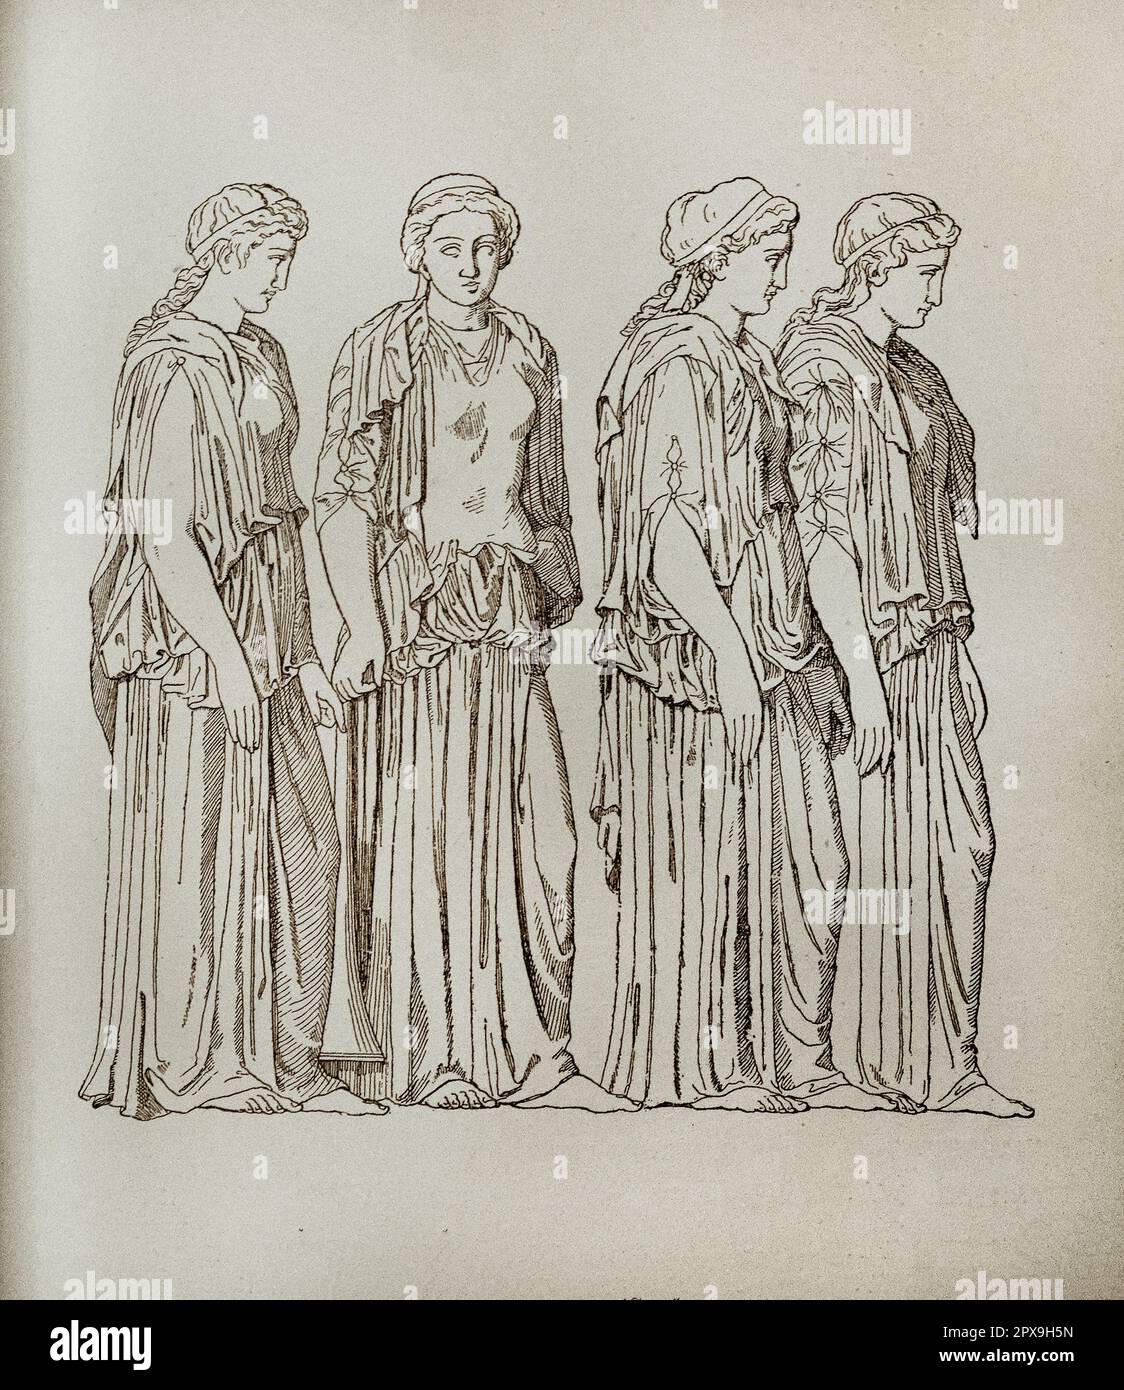 Vintage illustration of Athenian women in festive dresses. (Drawing from the frieze of the Parthenon) Stock Photo